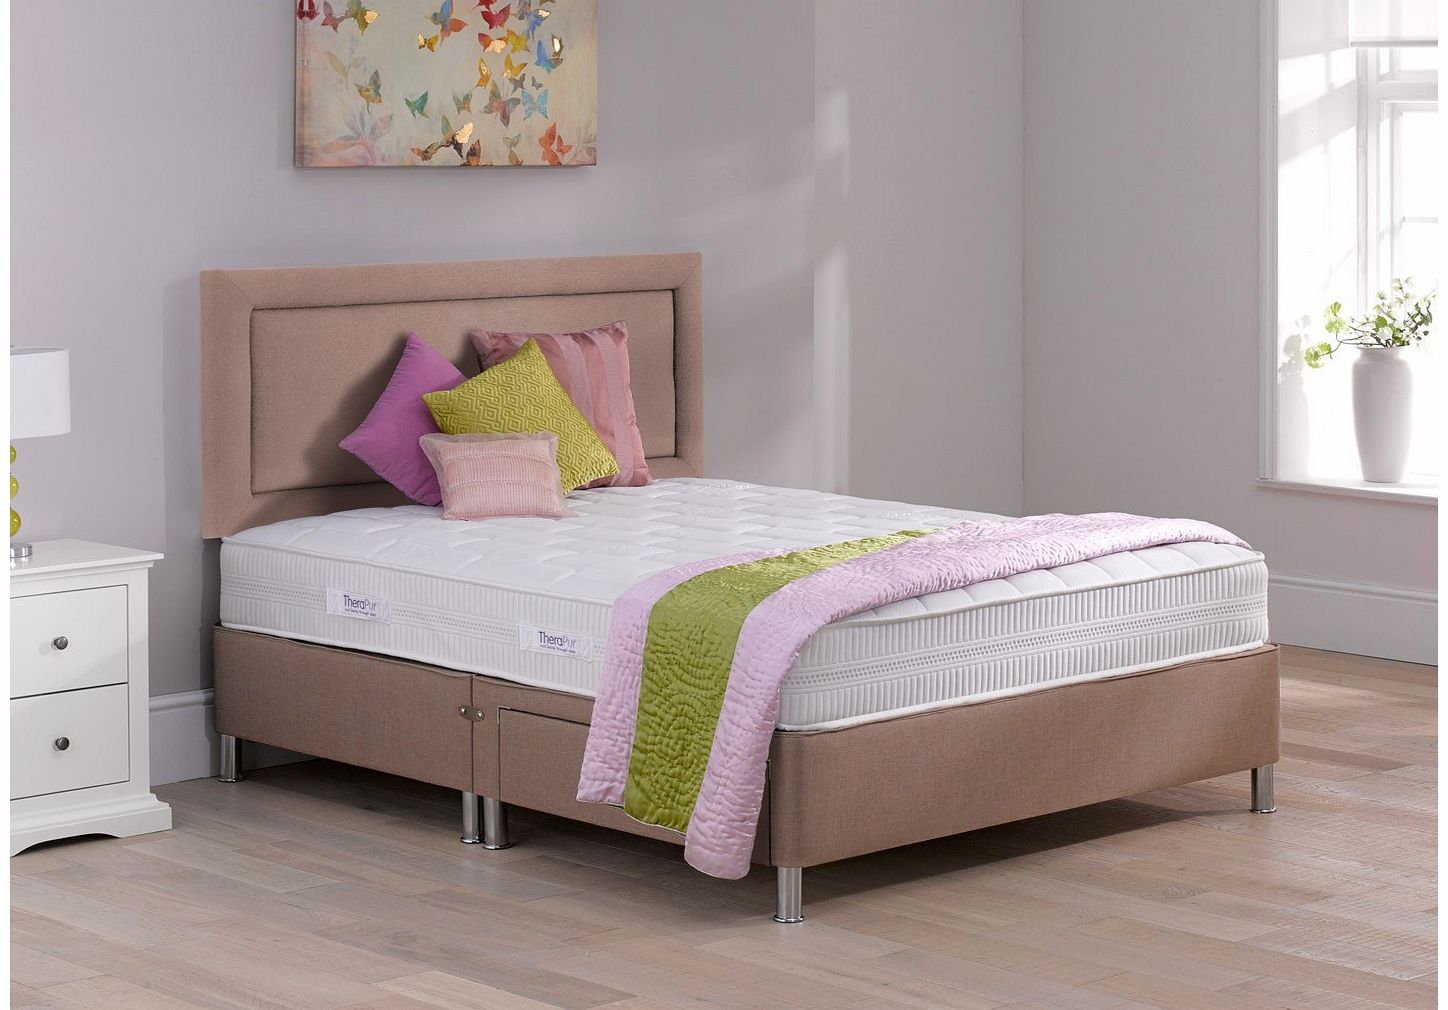 4`6 Double Therapur Affinity Divan Bed With Legs - Medium